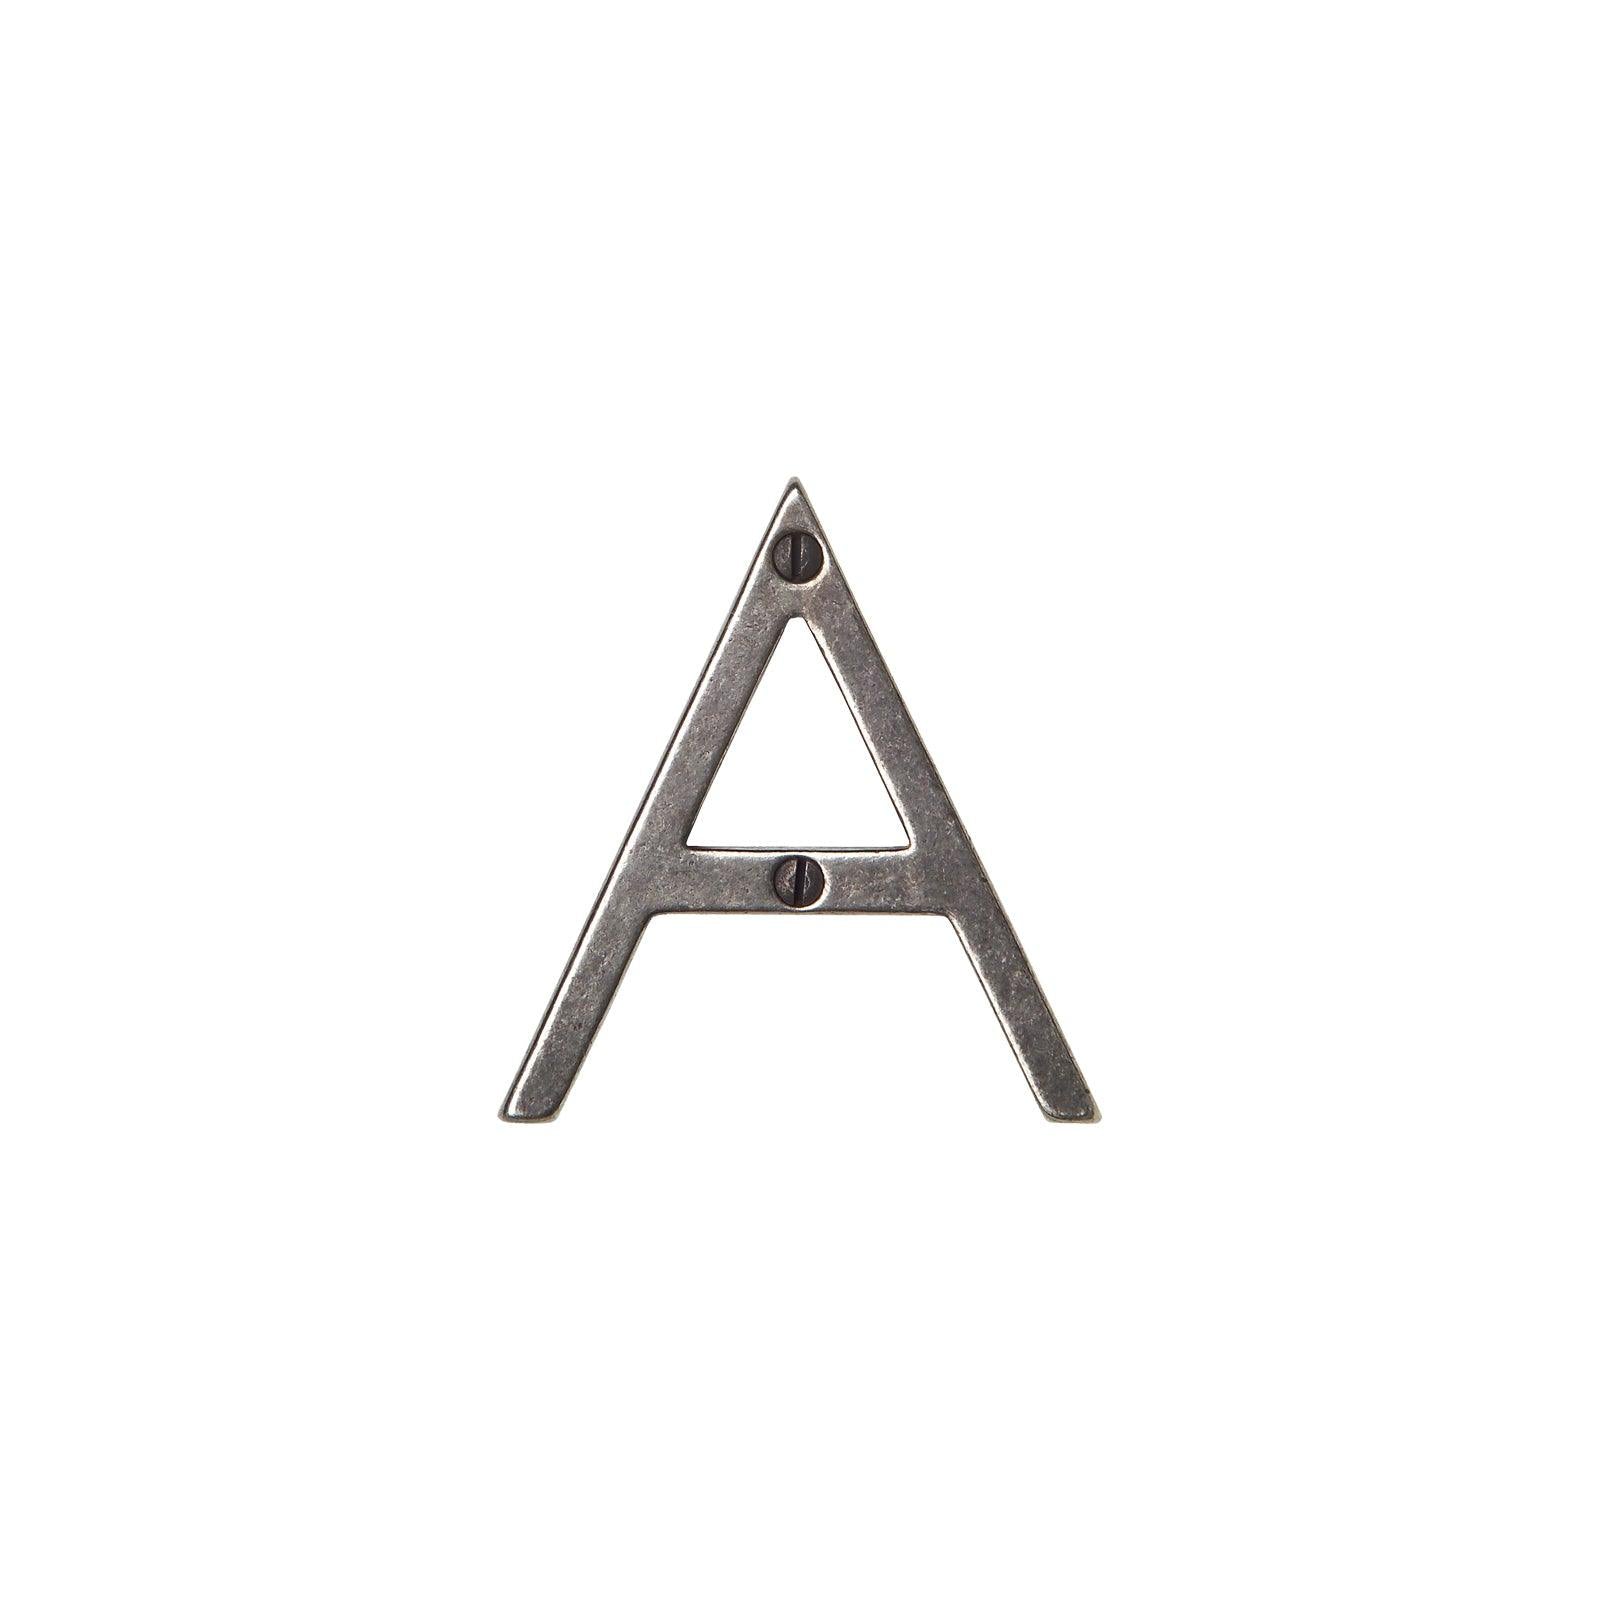 L275W - 2 3/4" House Letter “W" - Discount Rocky Mountain Hardware